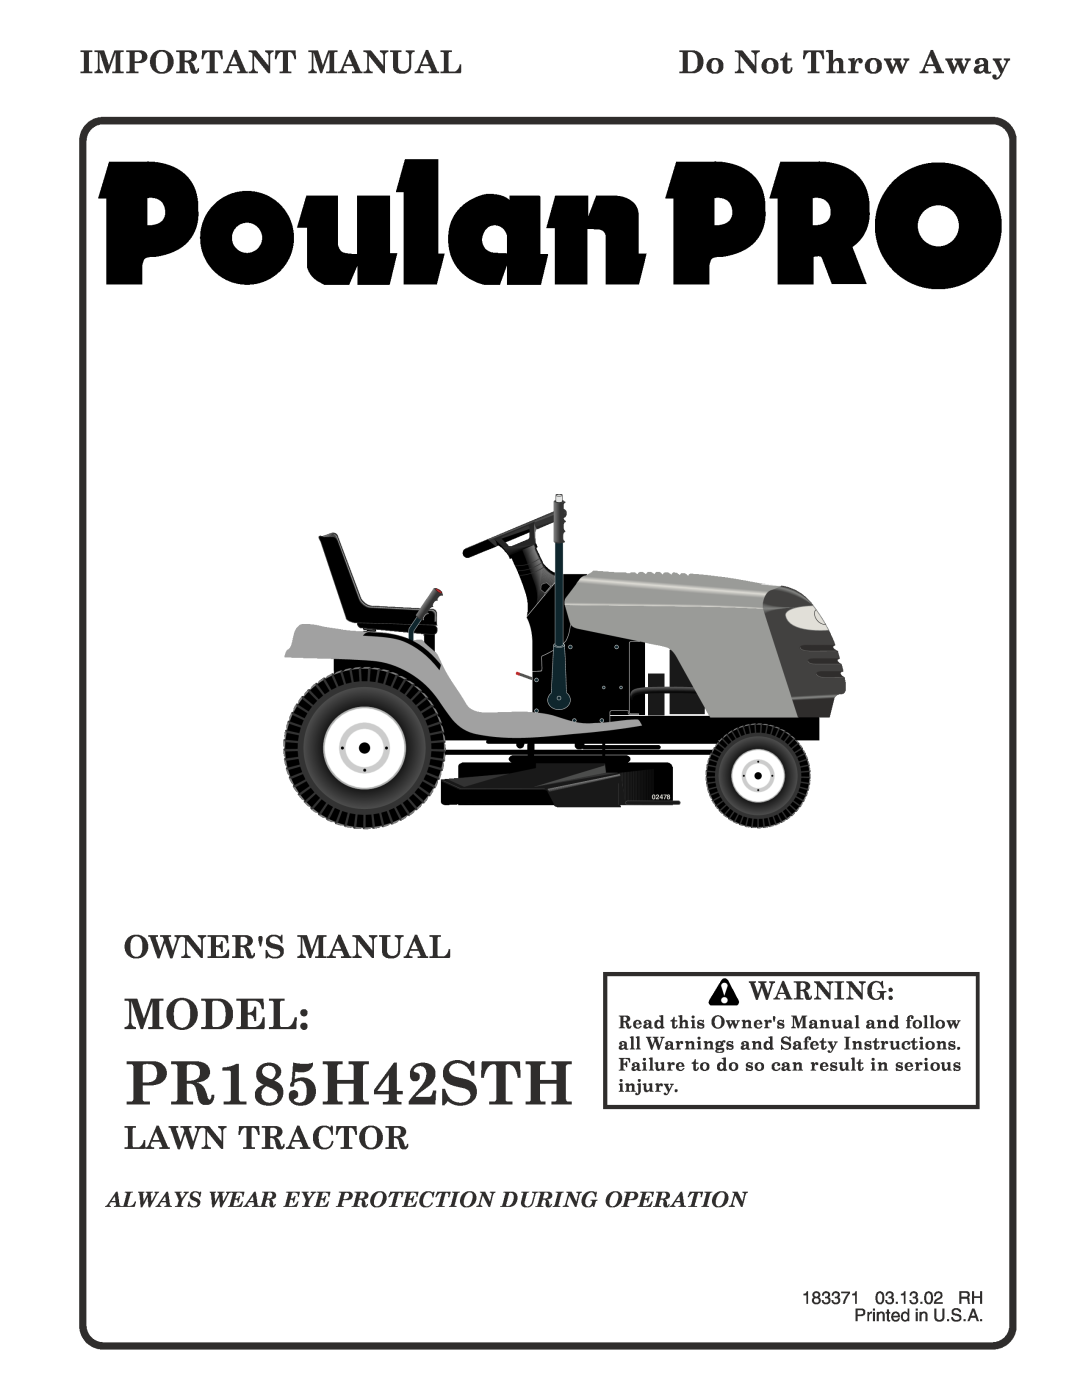 Poulan PR185H42STH owner manual Model, Important Manual, Do Not Throw Away, Owners Manual, Lawn Tractor, 02478 